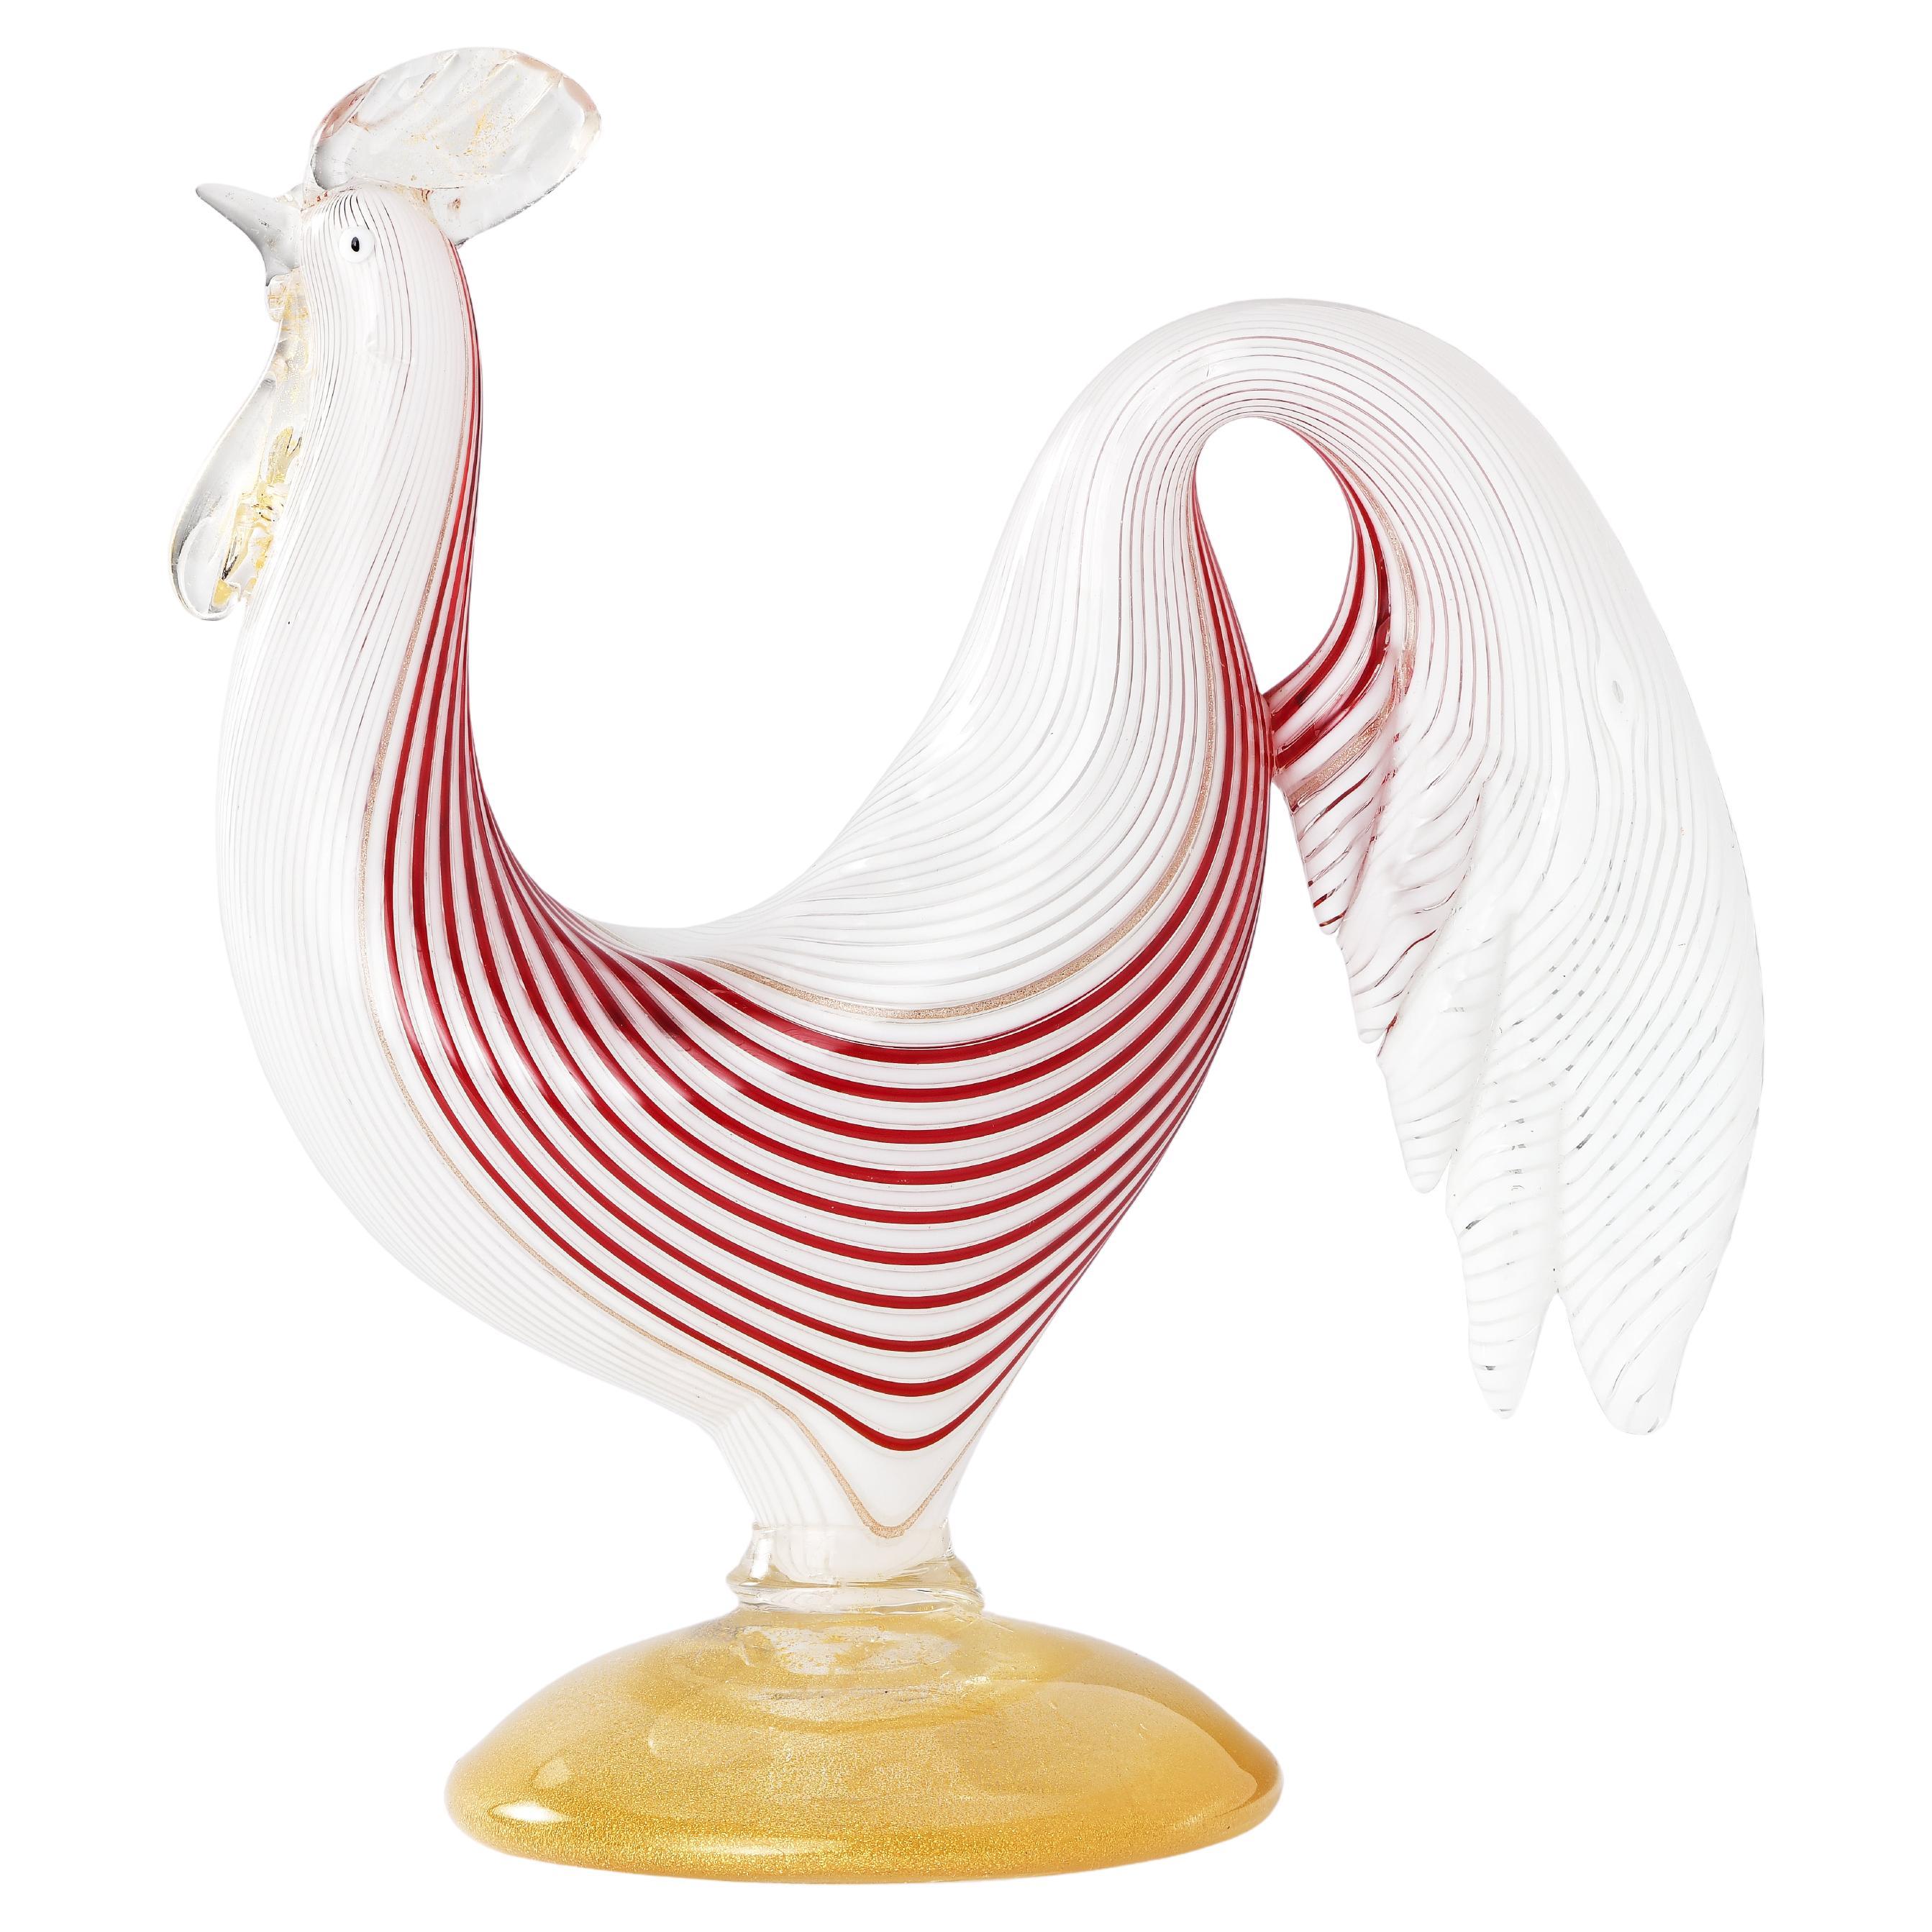 Murano Glass Rooster-Shaped Sculpture, Dino Martens, Venice Aureliano Toso, 1954 For Sale